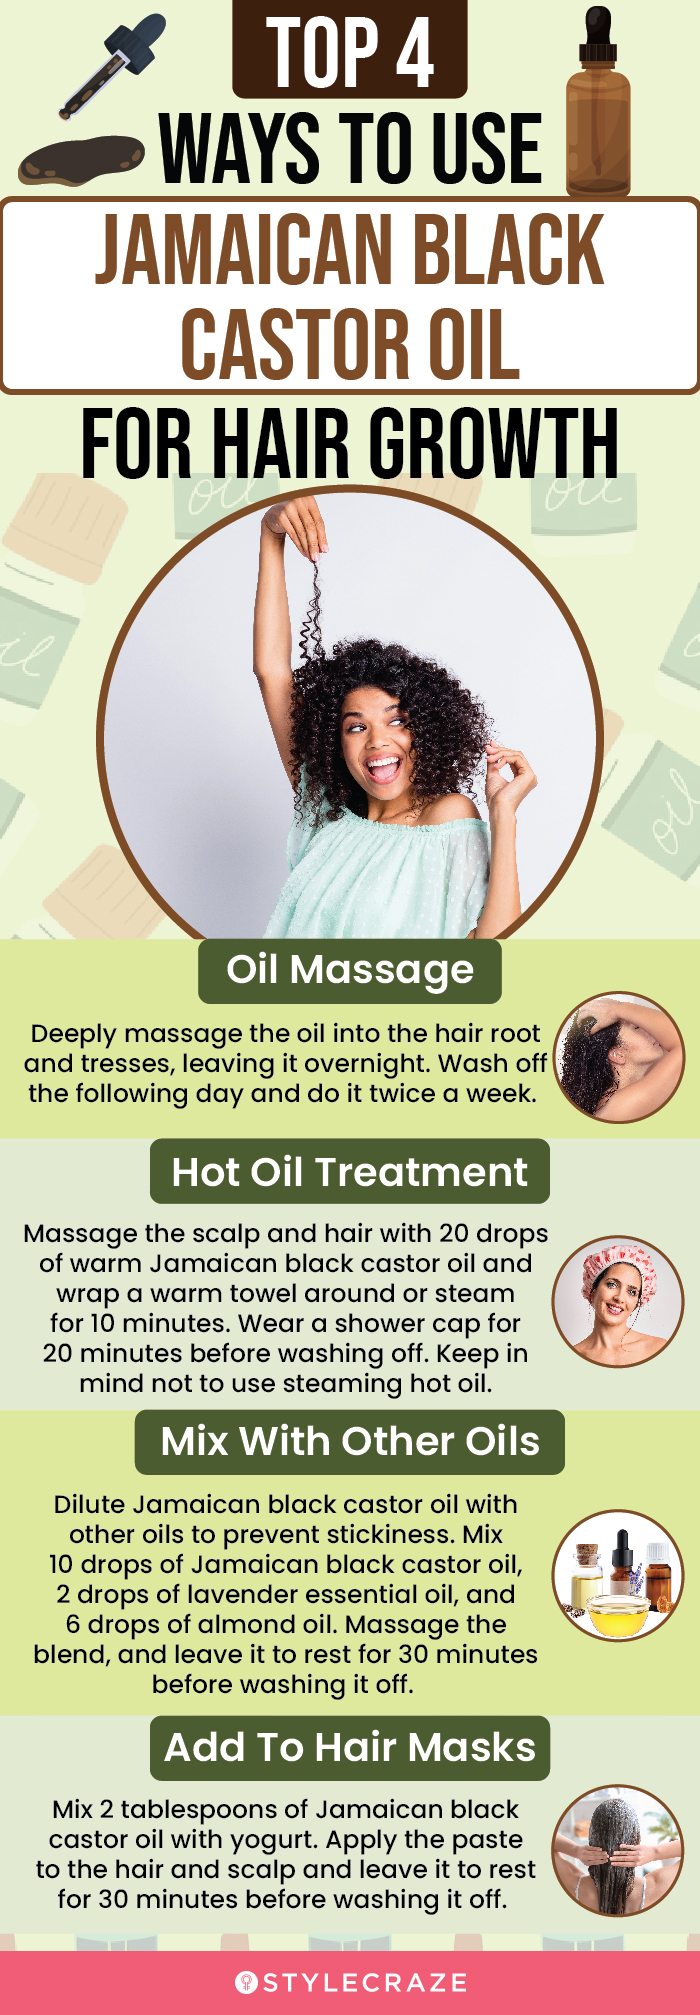 top 4 ways to use jamaican black castor oil for hair growth (infographic)